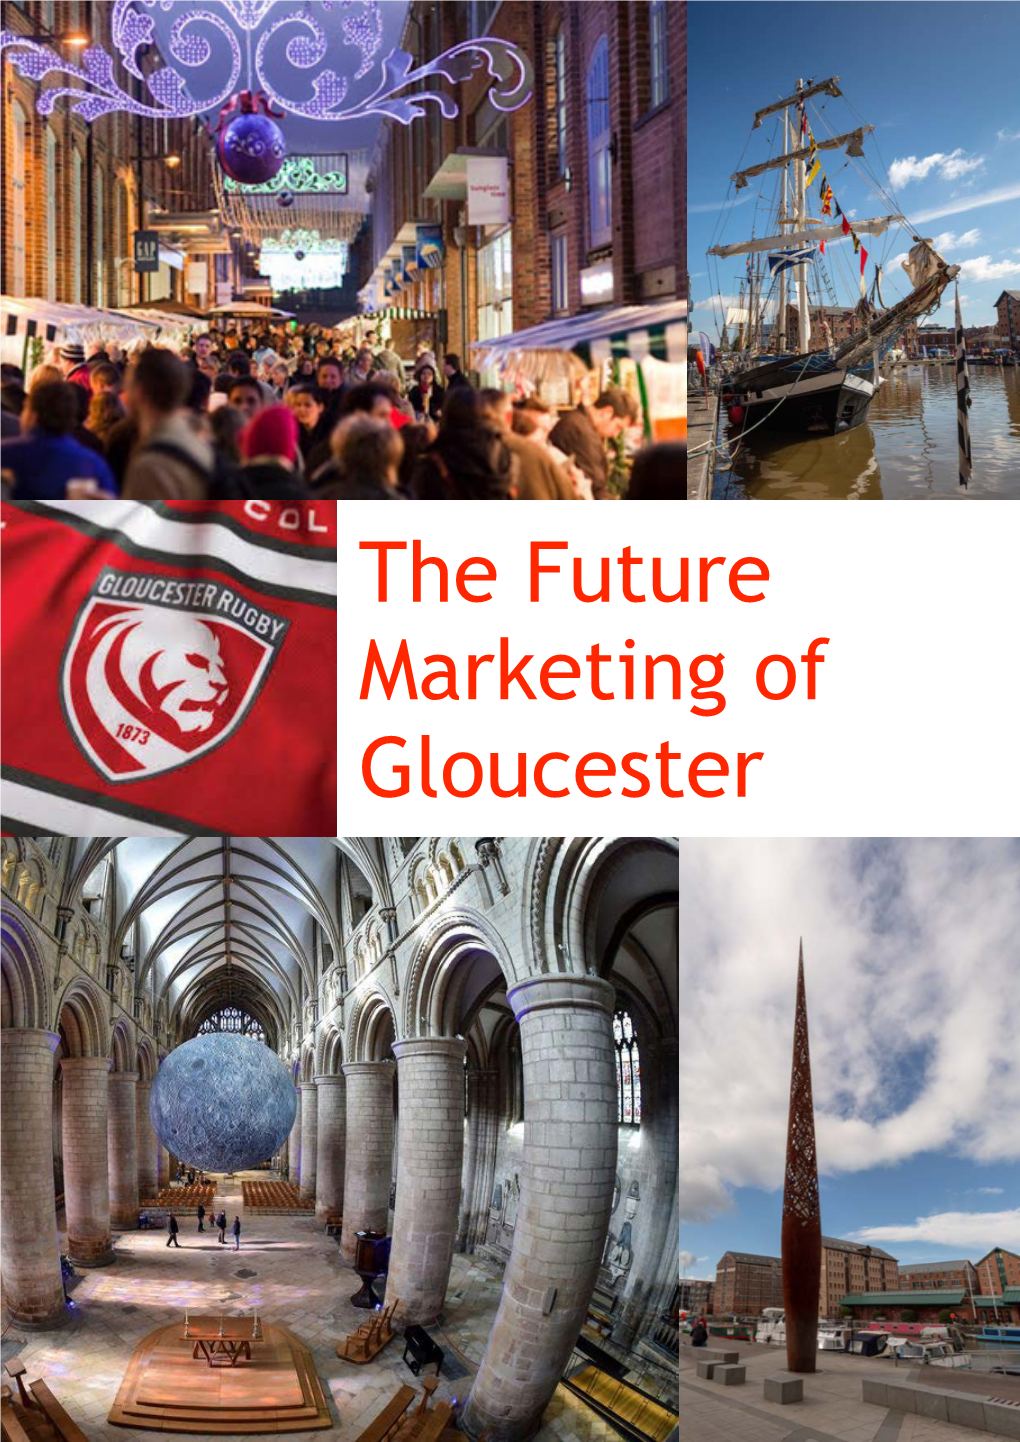 The Future Marketing of Gloucester